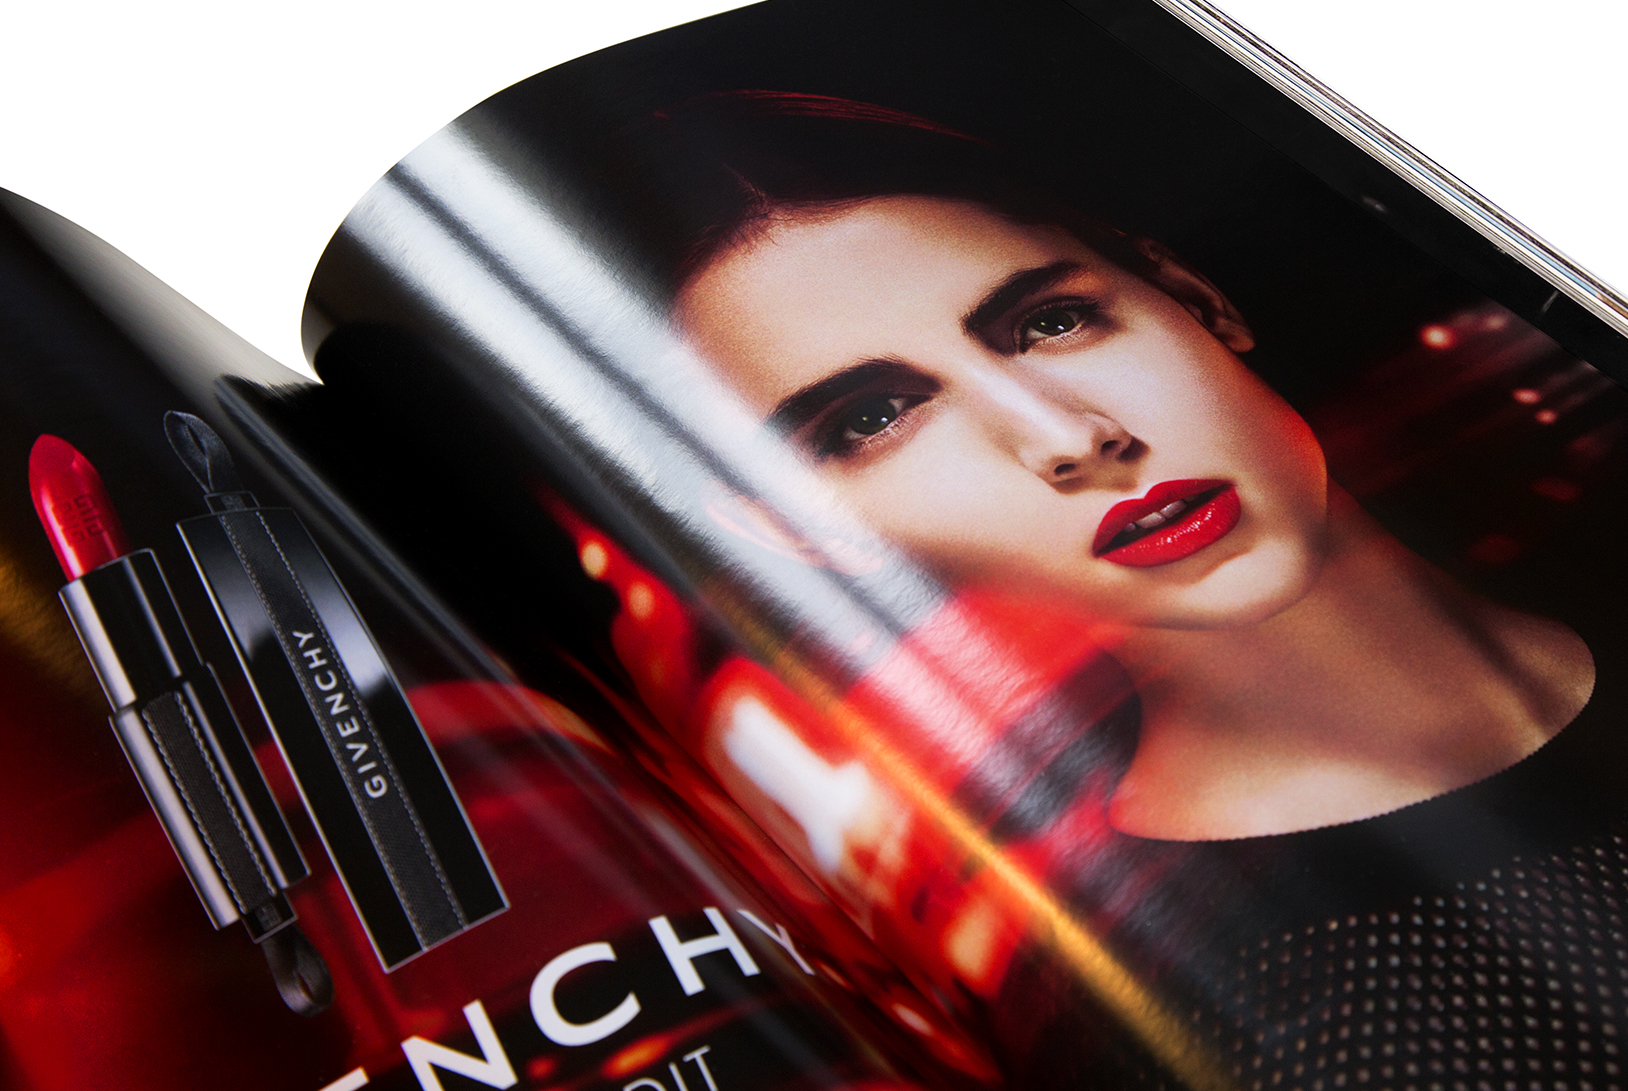 CARLA COSTE / Art Director & Image Maker GIVENCHY – Rouge Interdit